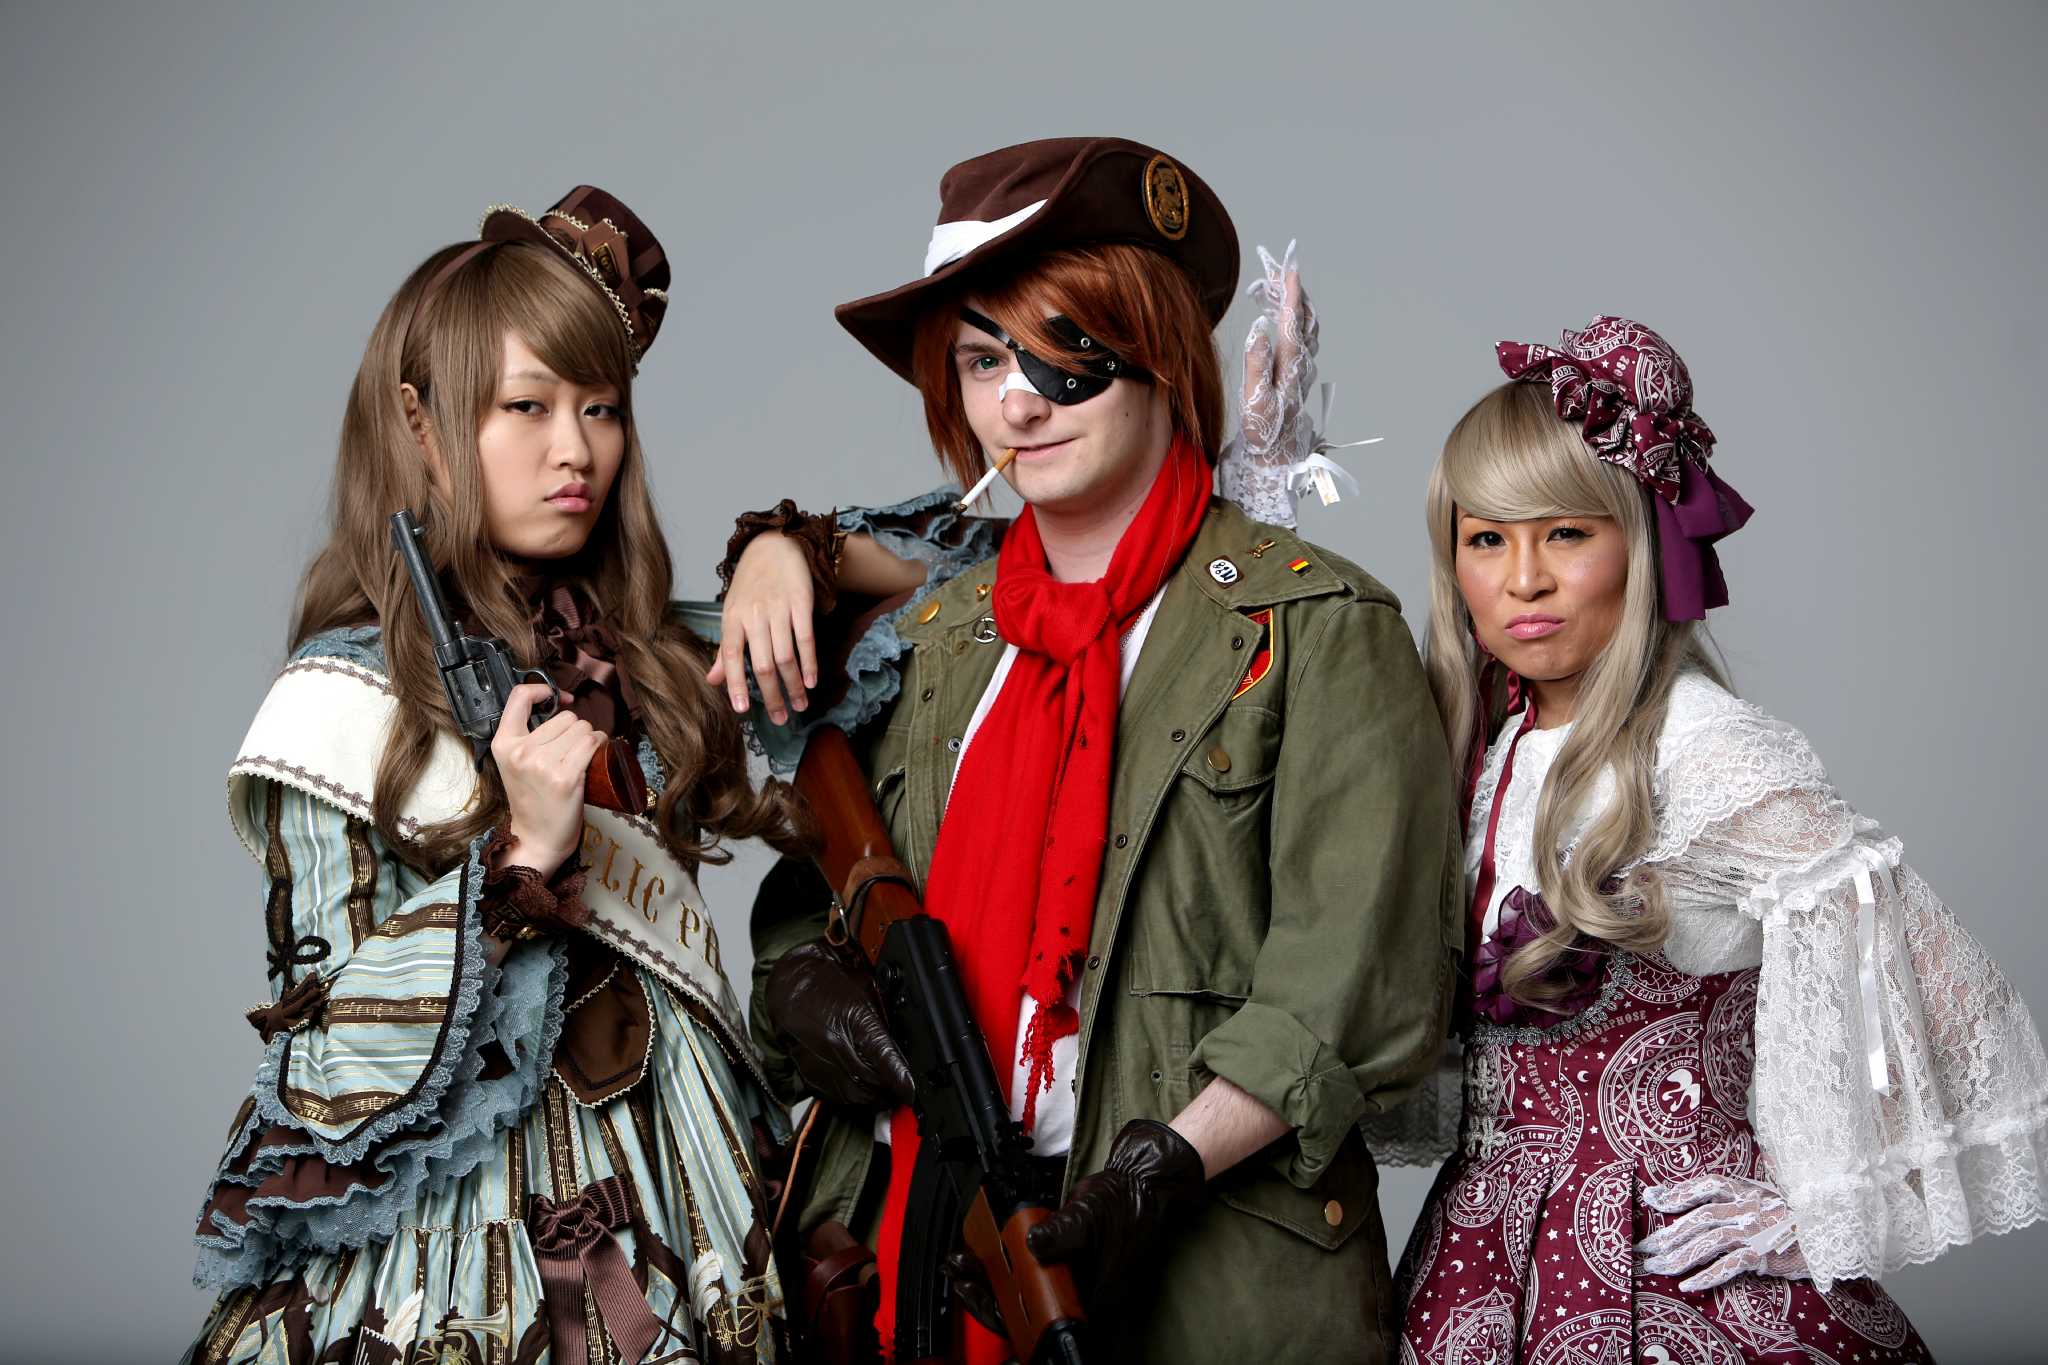 Anime convention Victorian fashion meets Japanese pop culture